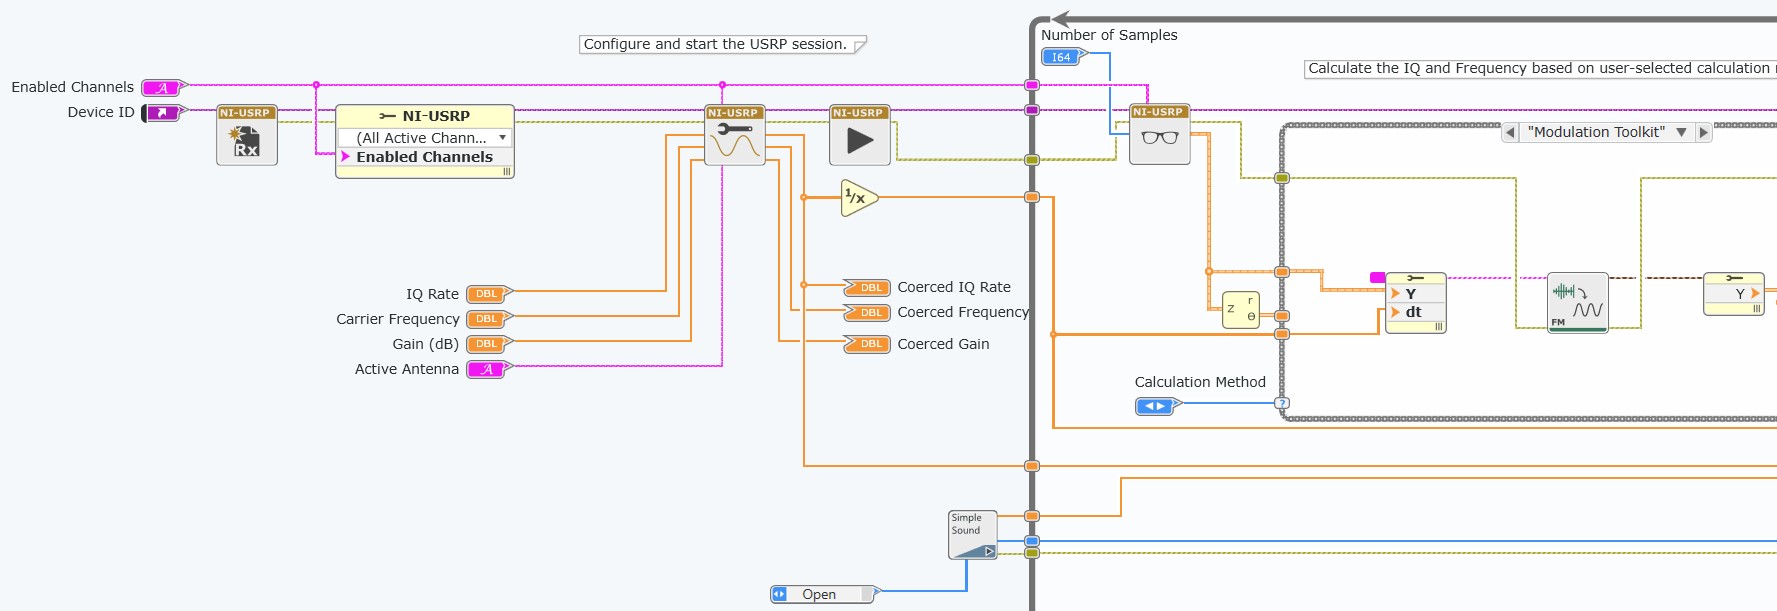 Screenshot of a LabVIEW block diagram with the USRP driver API